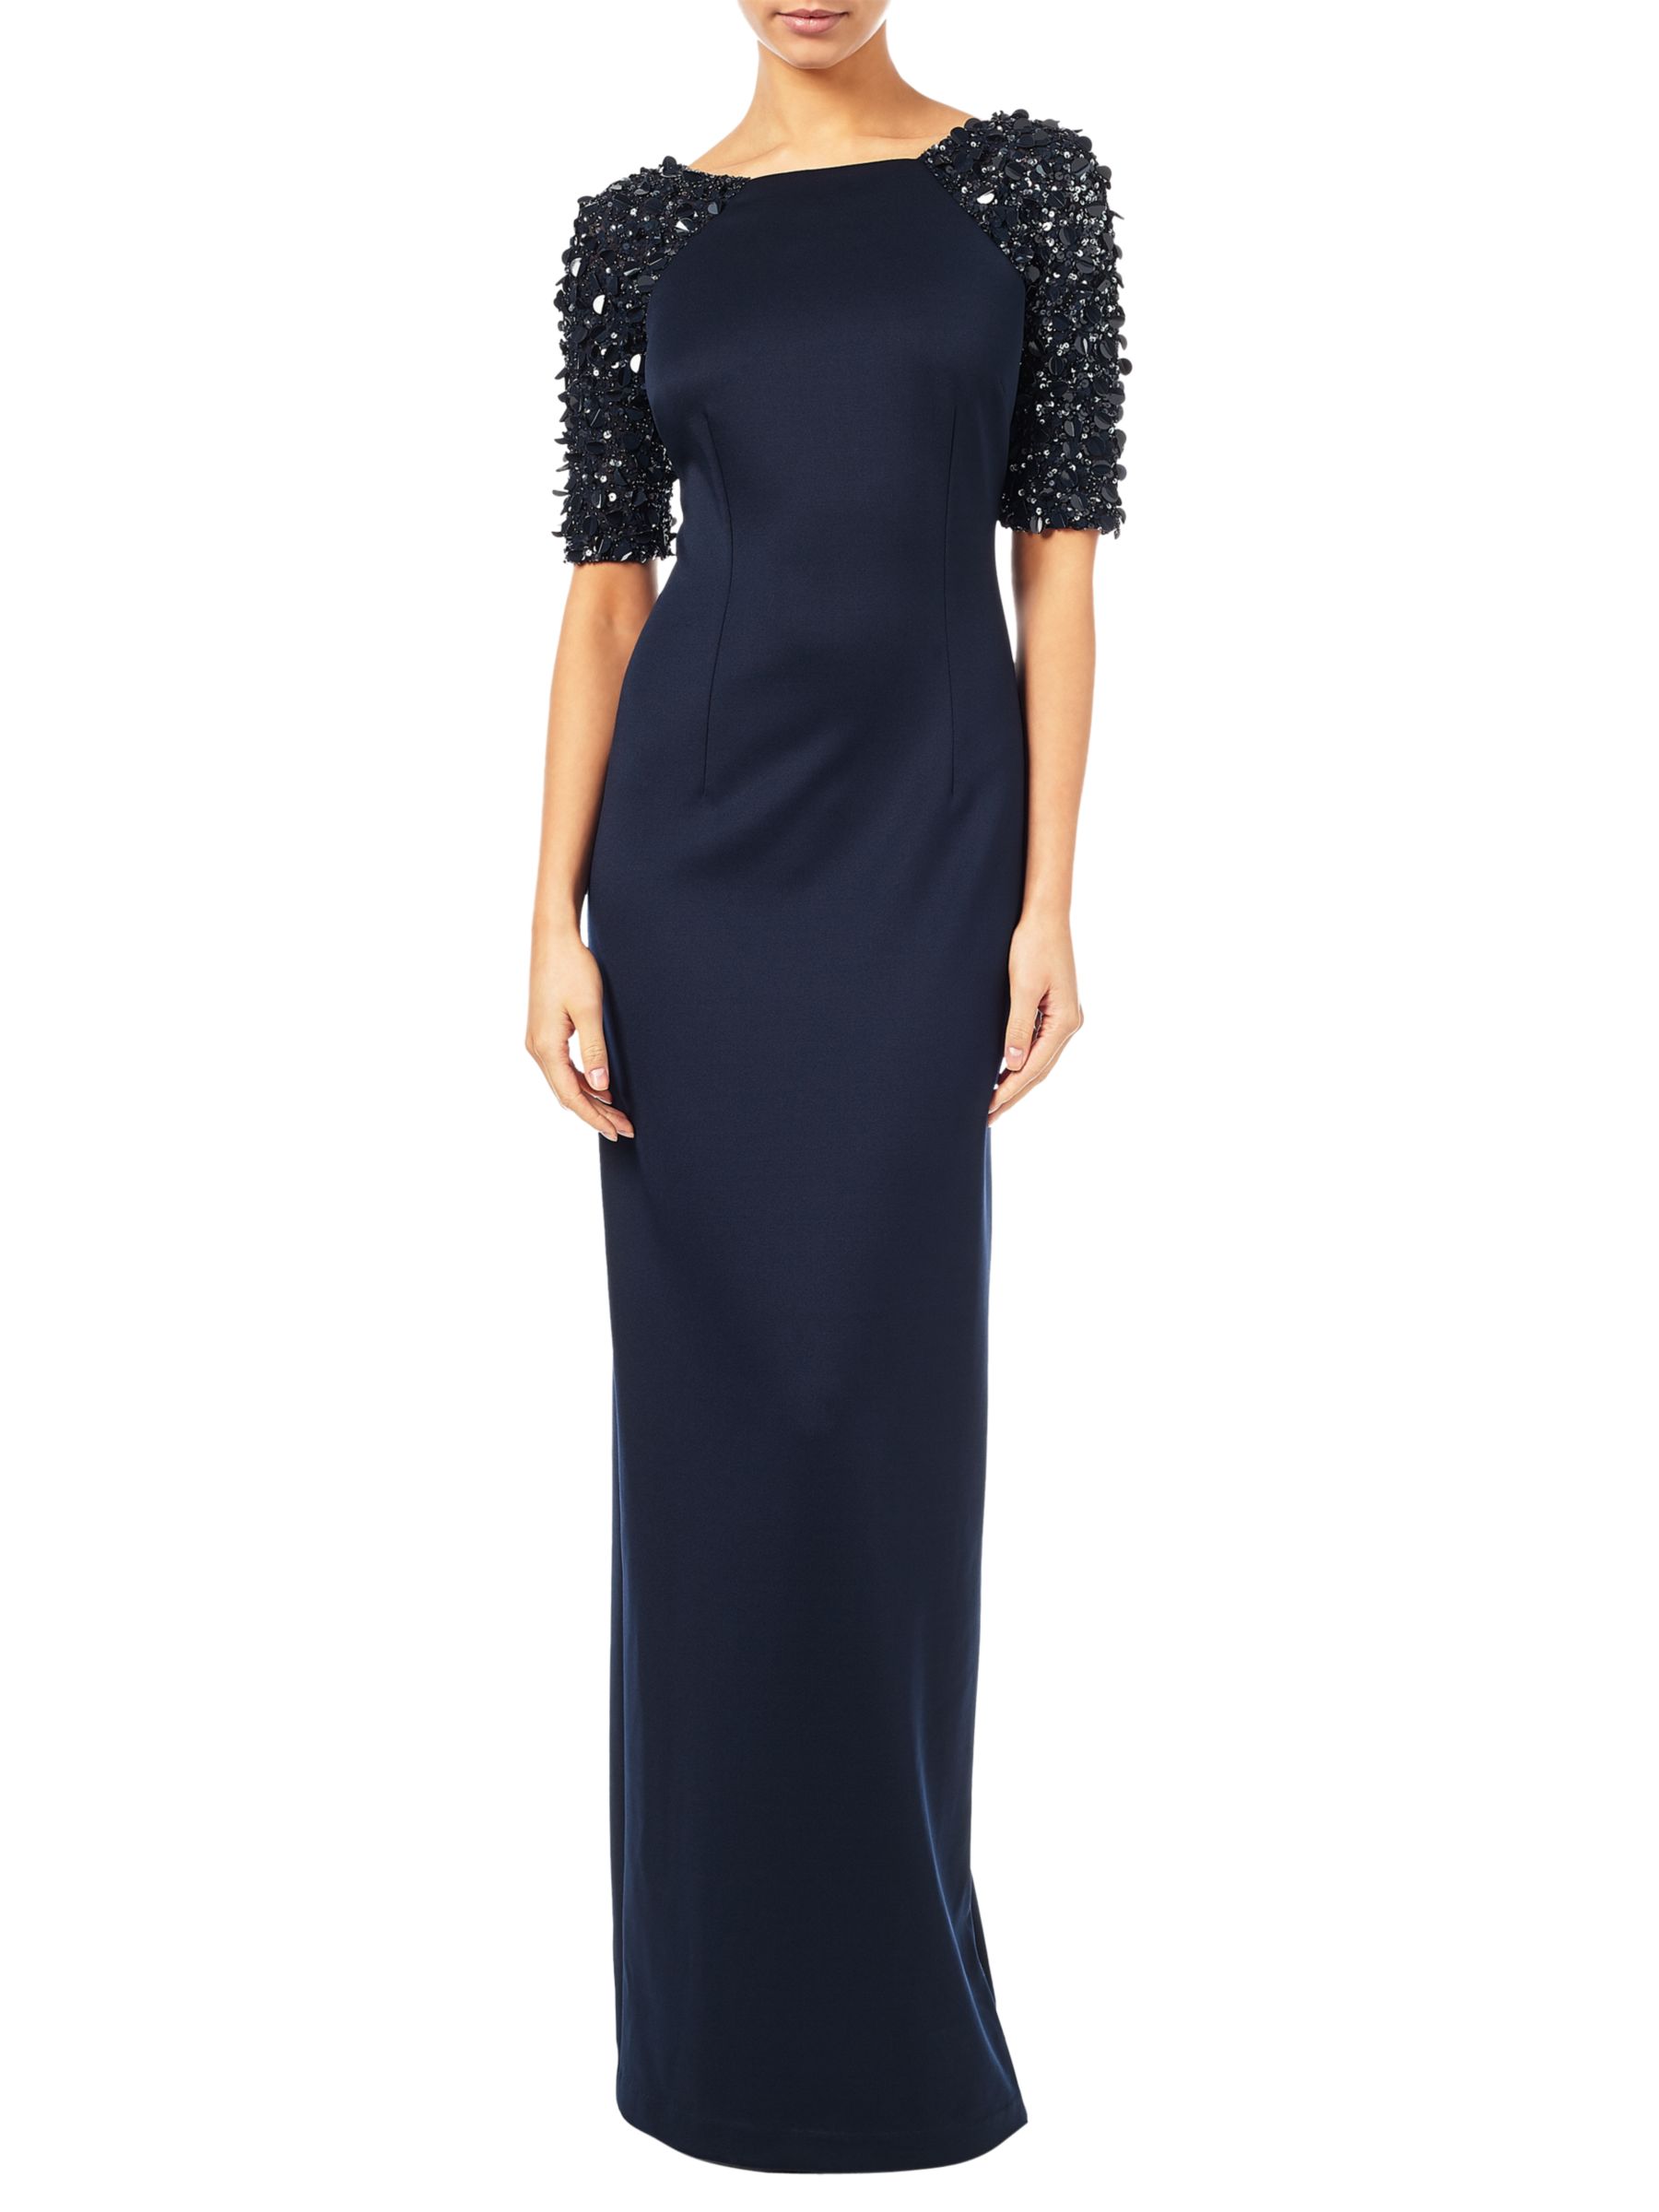 Adrianna Papell Stretch Knit Column Gown, Navy